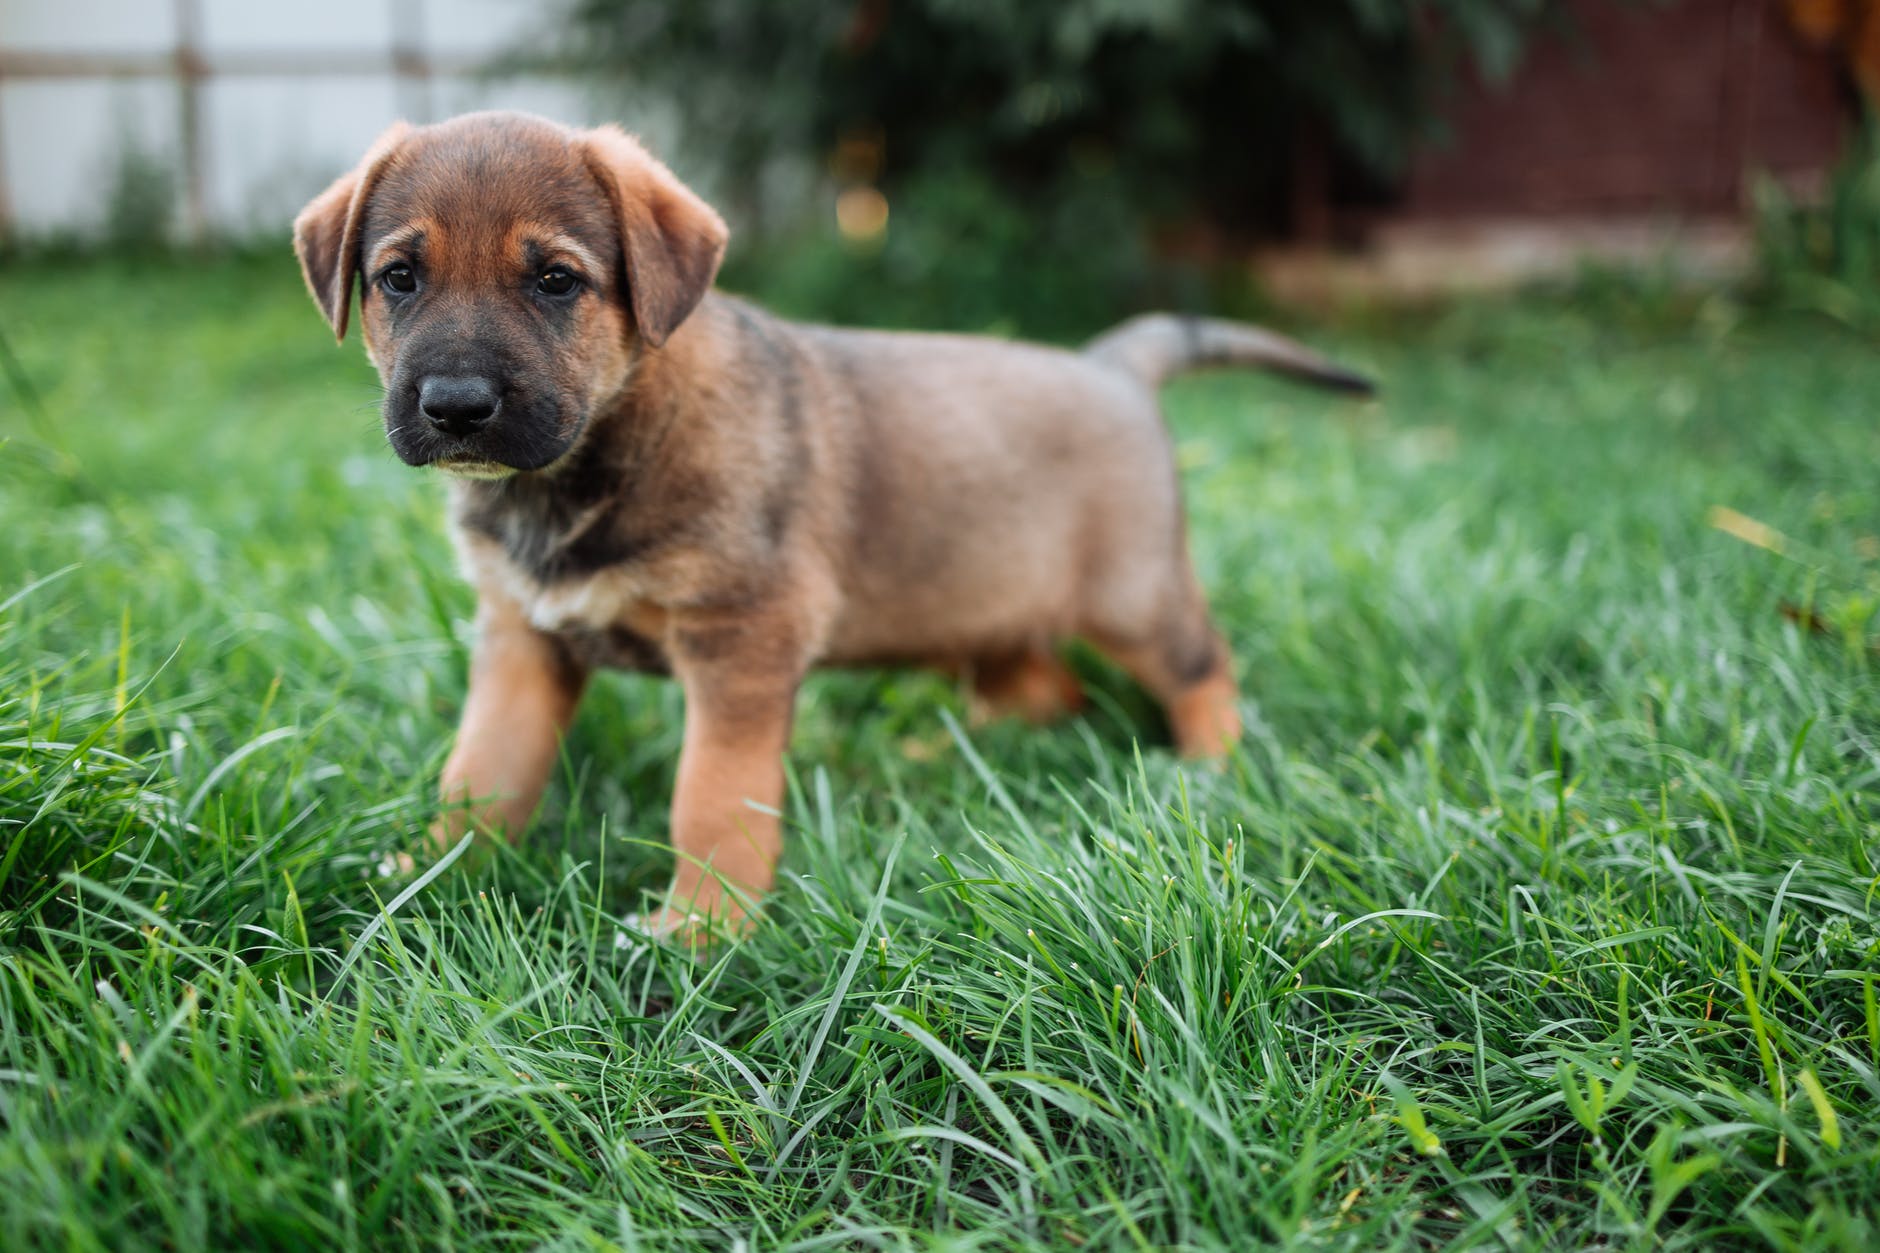 brown and black short coated puppy running on green grass field